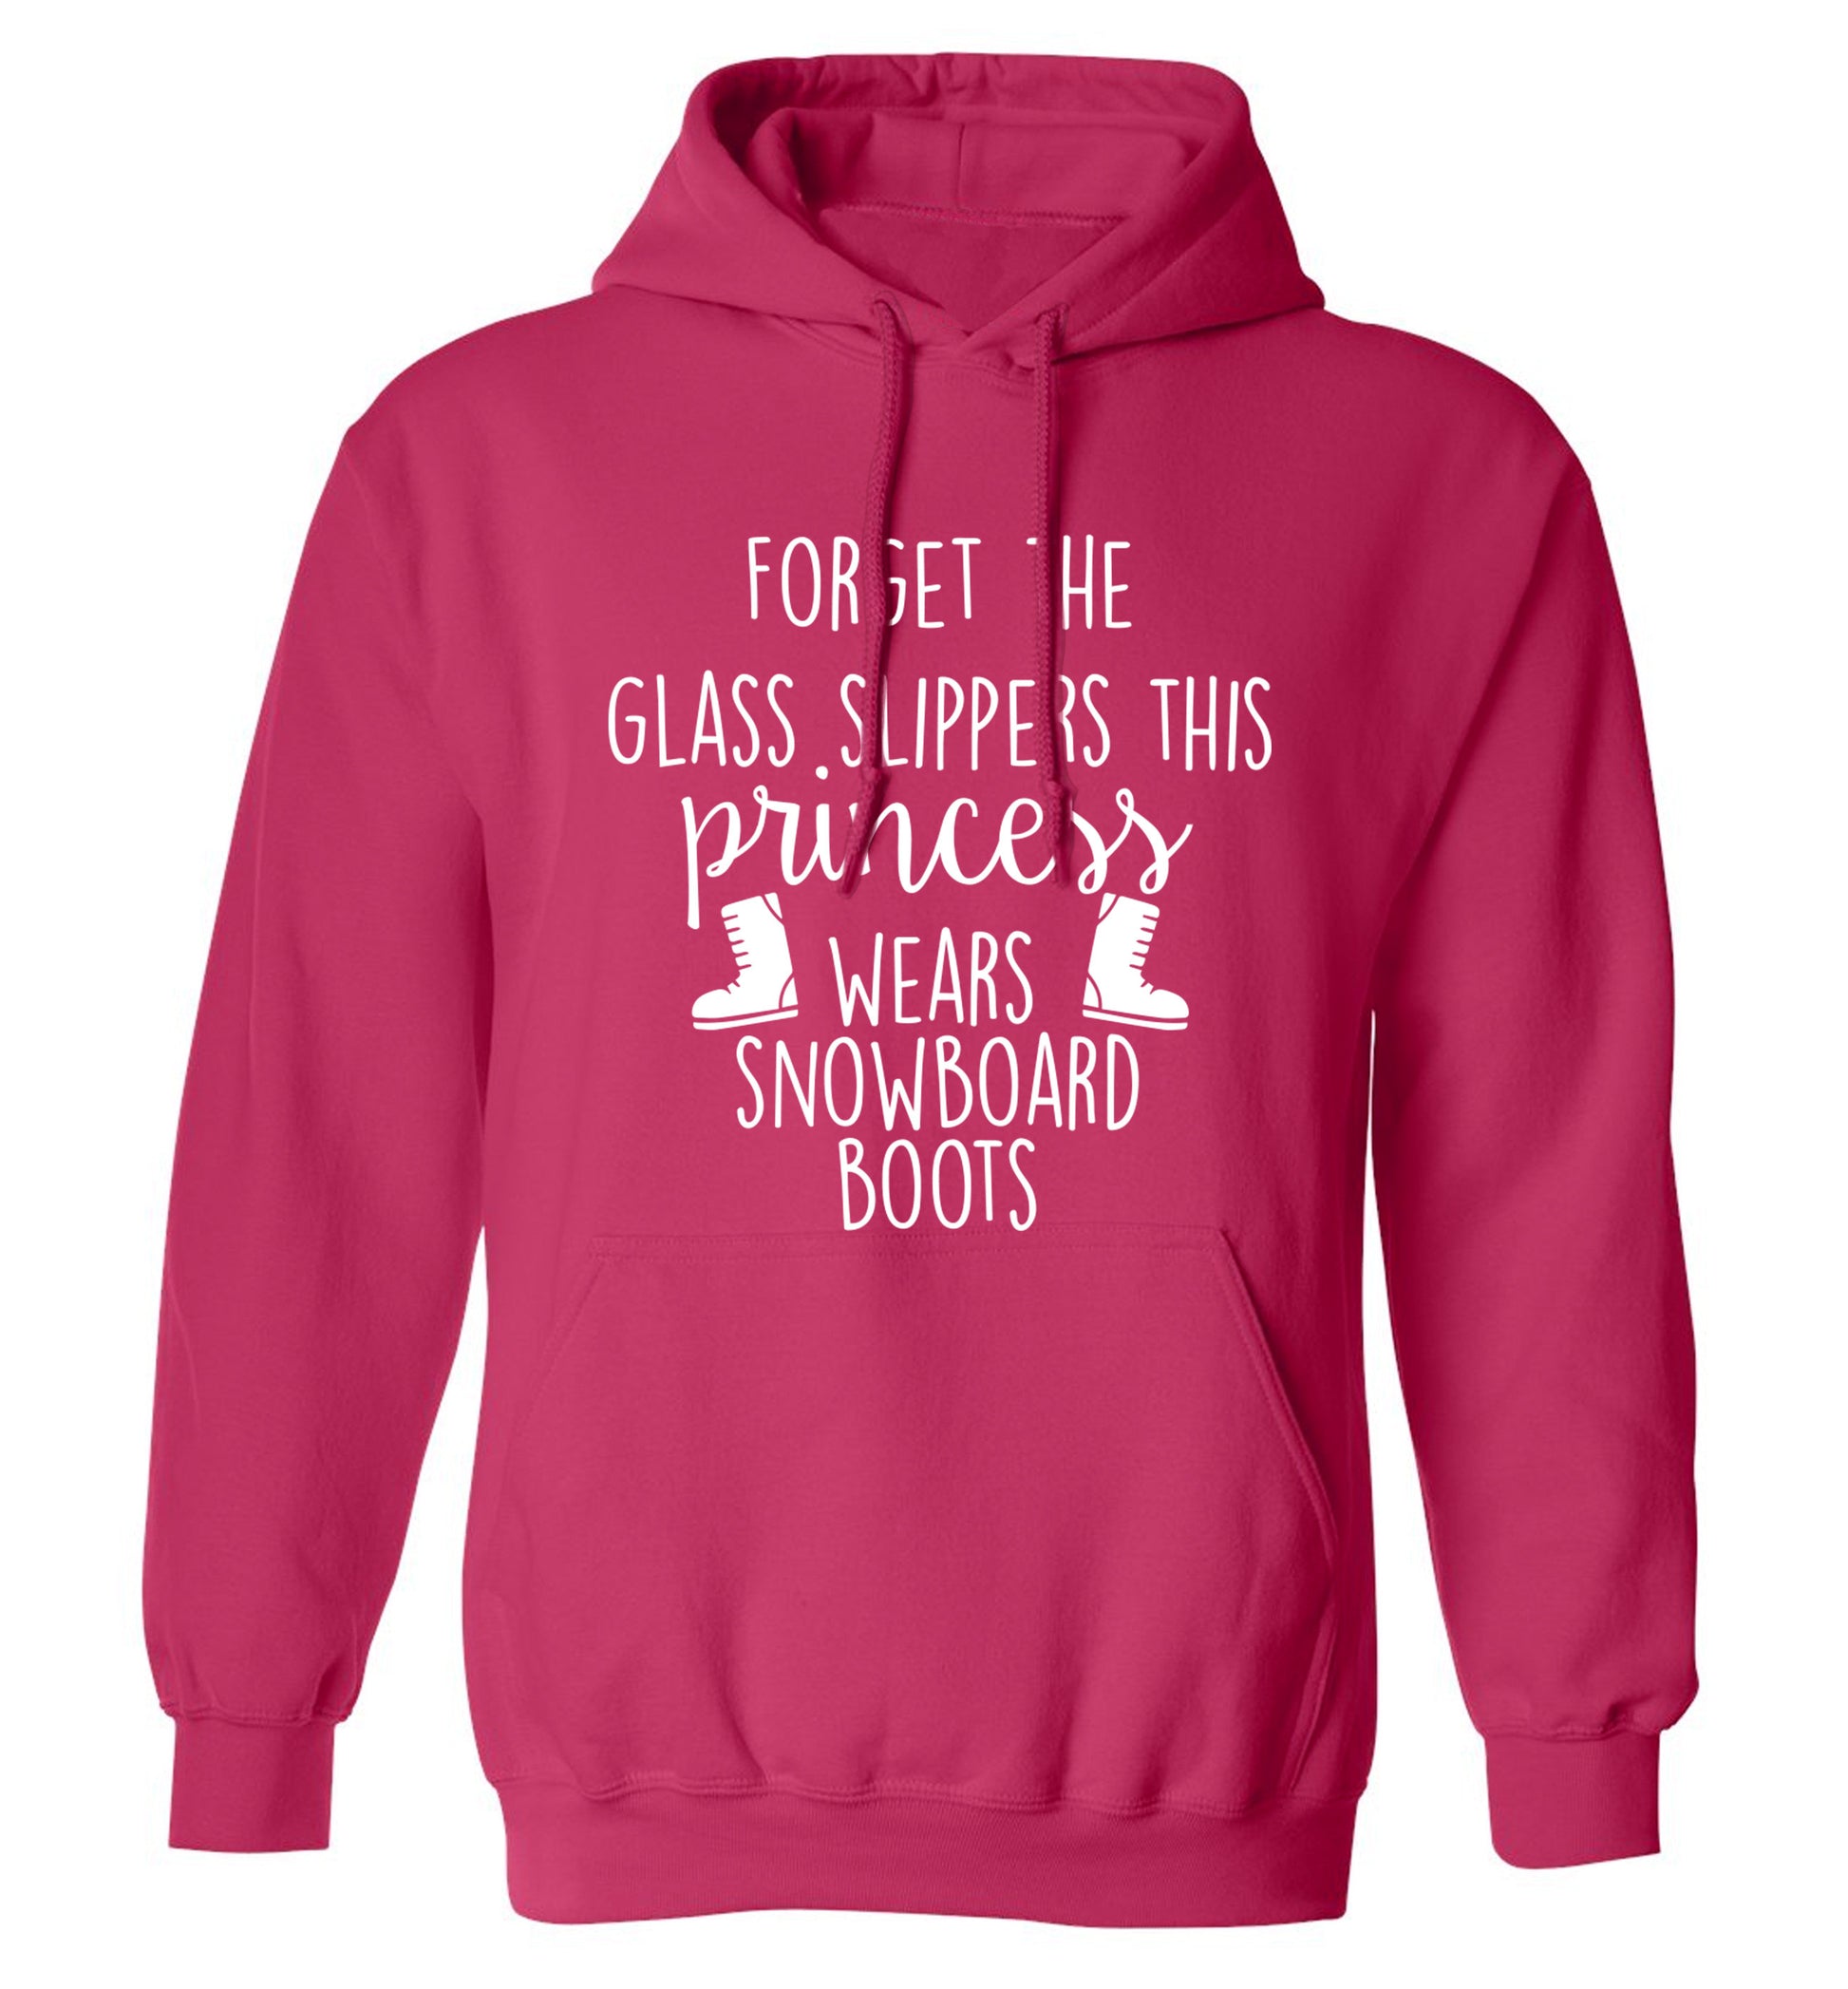 Forget the glass slippers this princess wears snowboard boots adults unisex pink hoodie 2XL